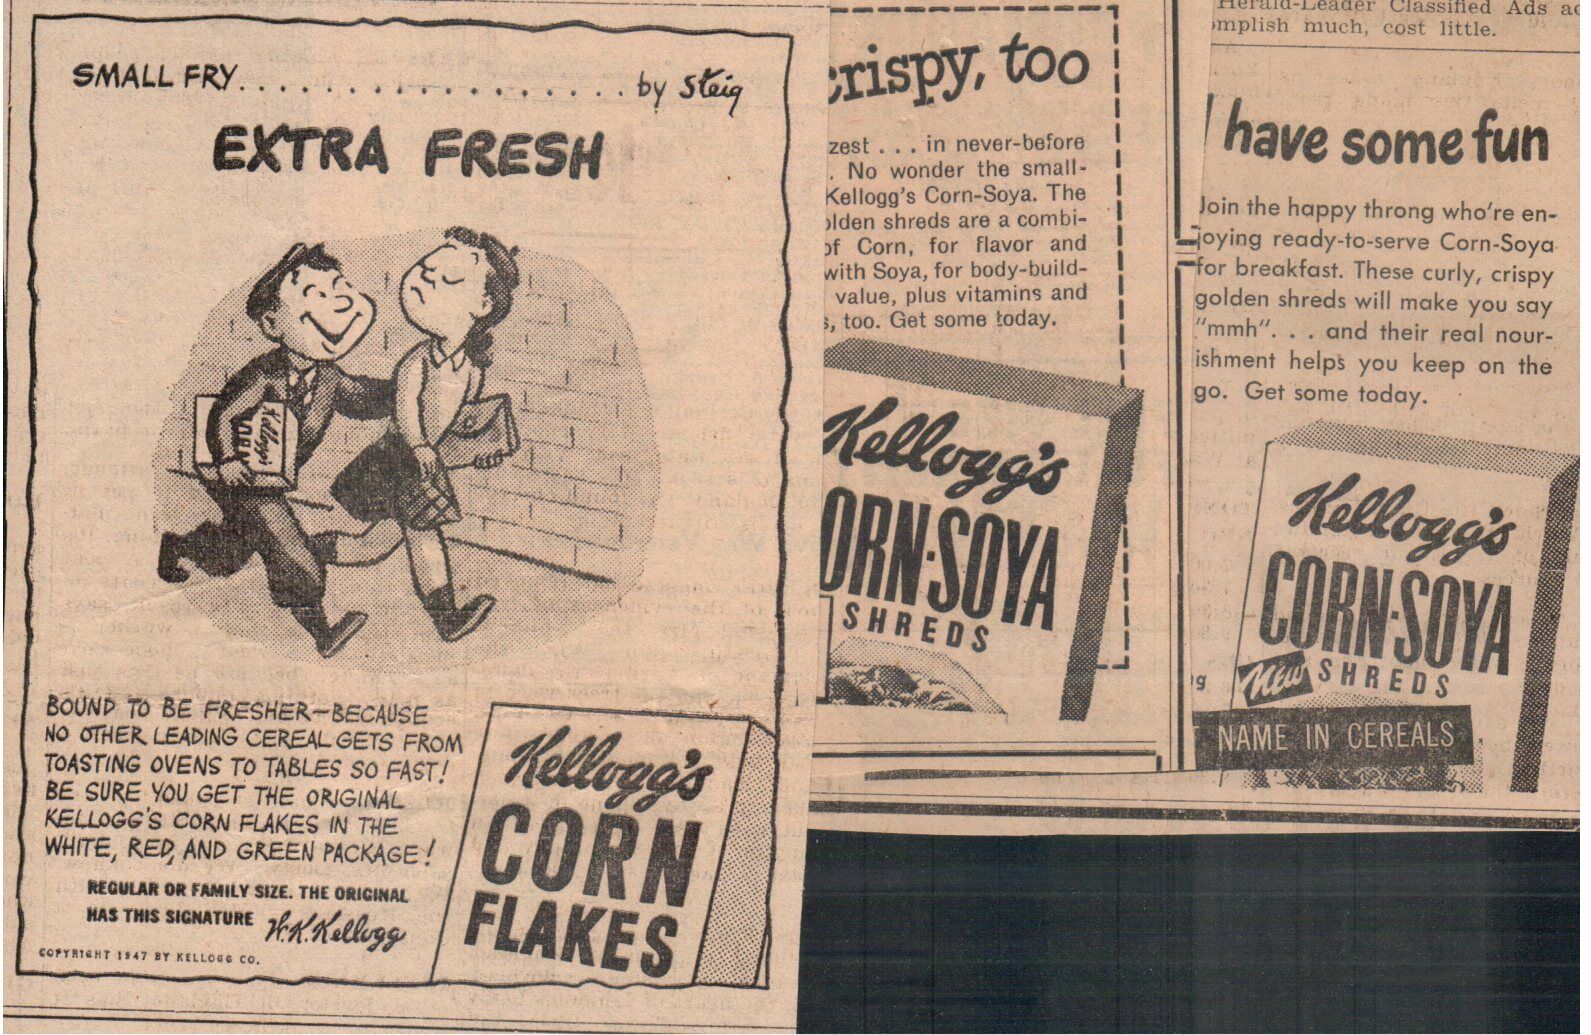 1940's Kellogg's Corn Flakes & Corn Soya cereal (3) newspaper clipping ad 4x4